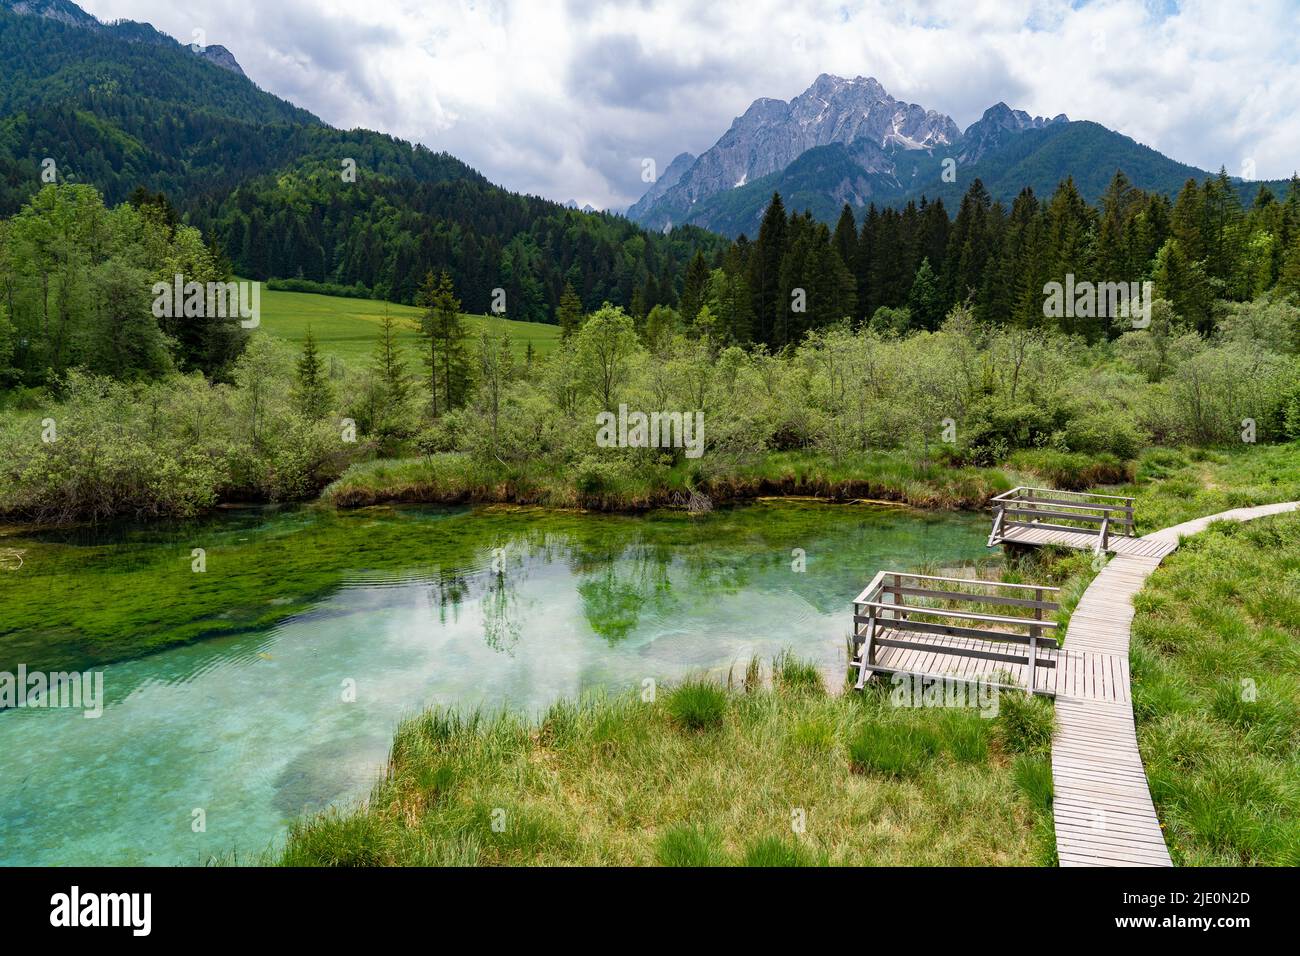 The source of river Save in Slovenia Stock Photo